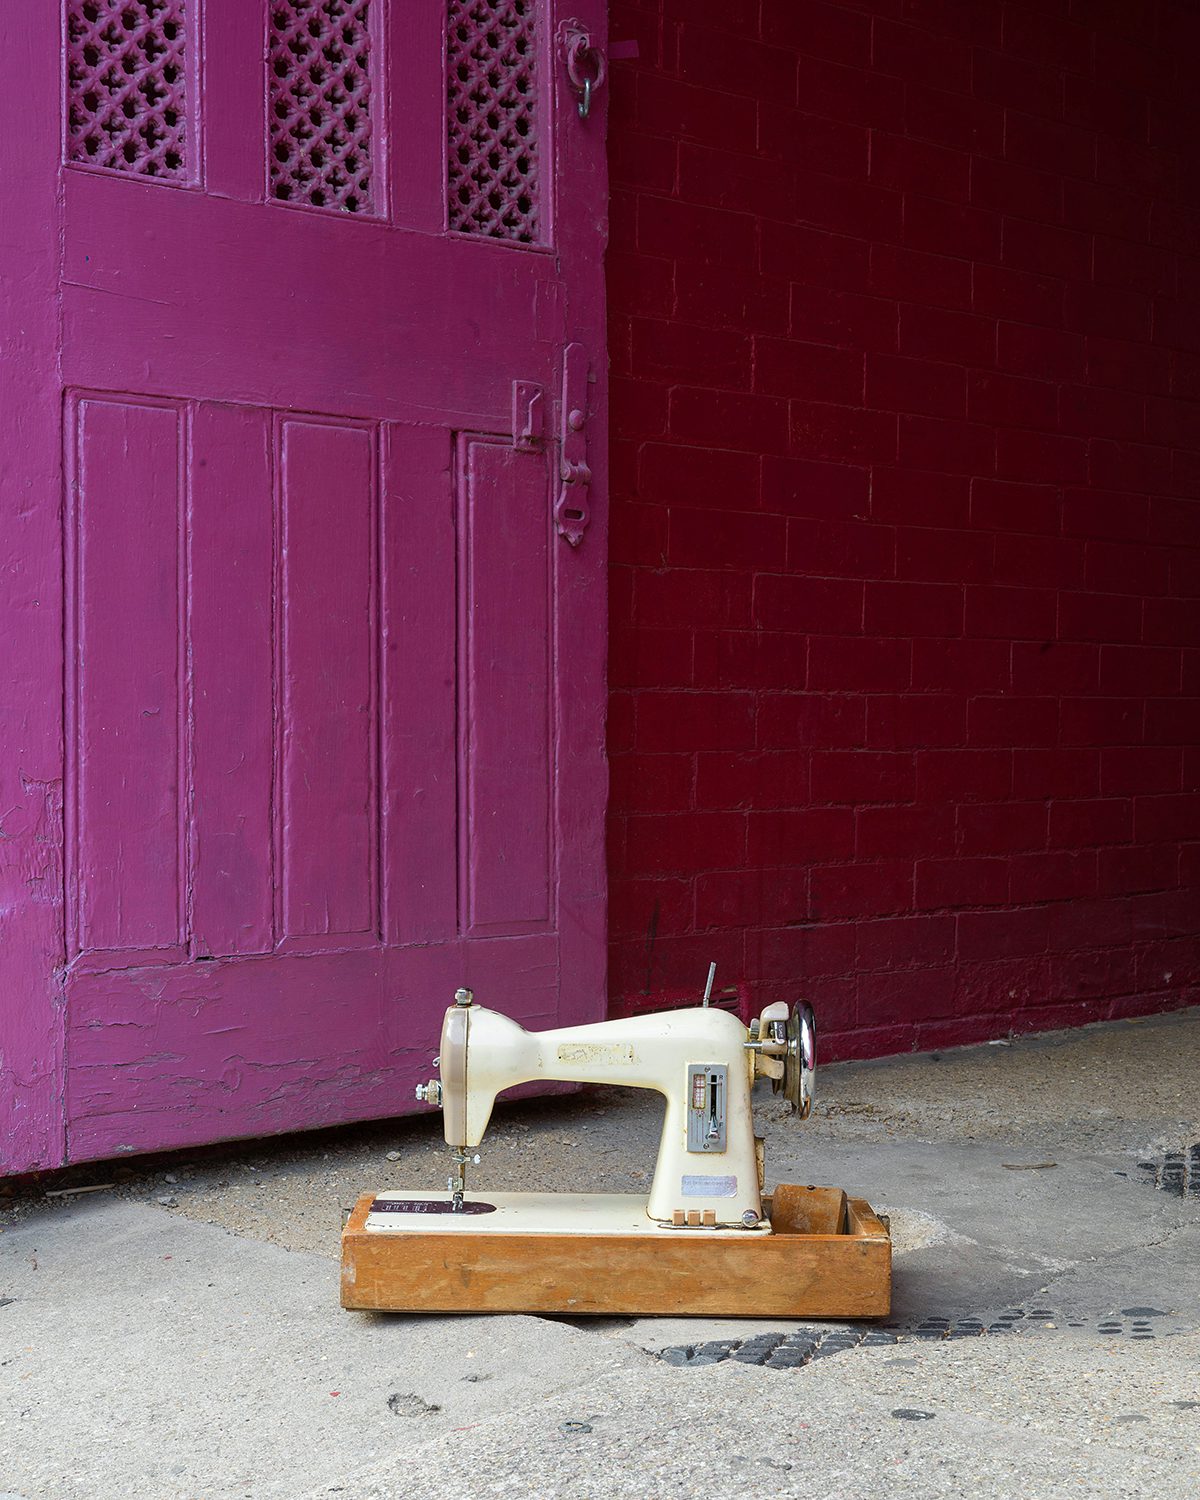 Image shows a sewing machine on the floor next to a purple door, taken from Kavi Pujara's book This Golden Mile